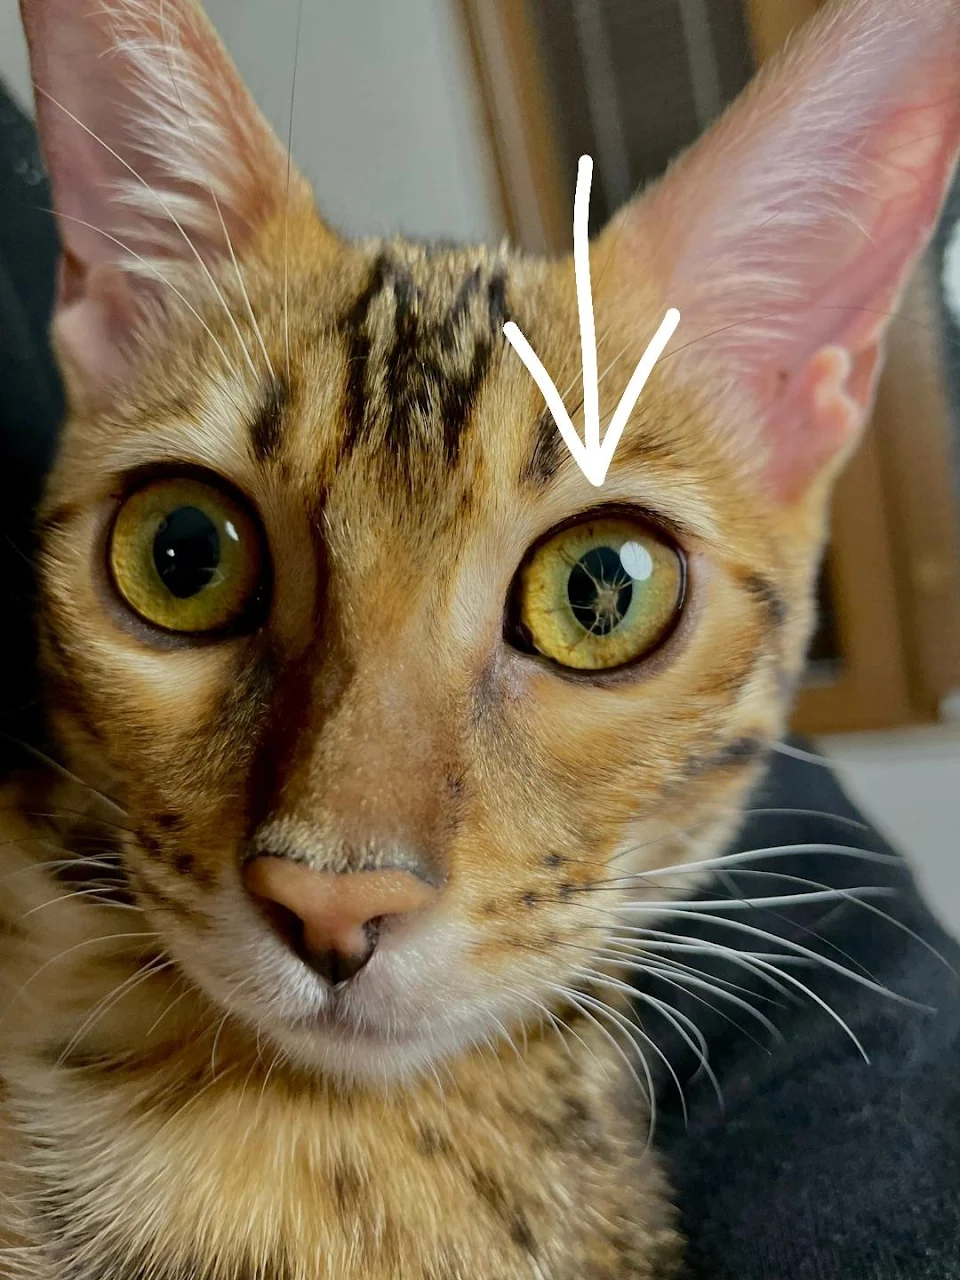 would anyone happen to know what this spider-like webbing in my cats eye is?